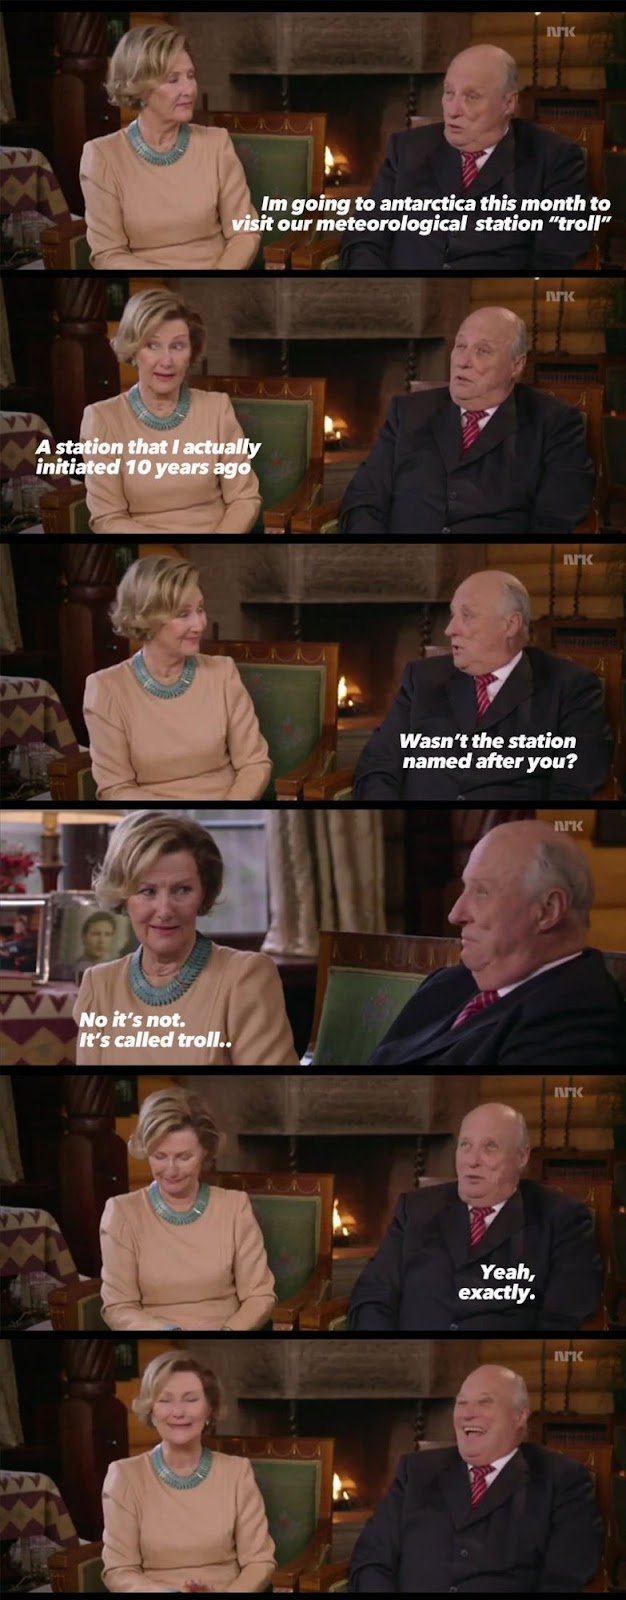 Queen Sonja and King Harald meme.